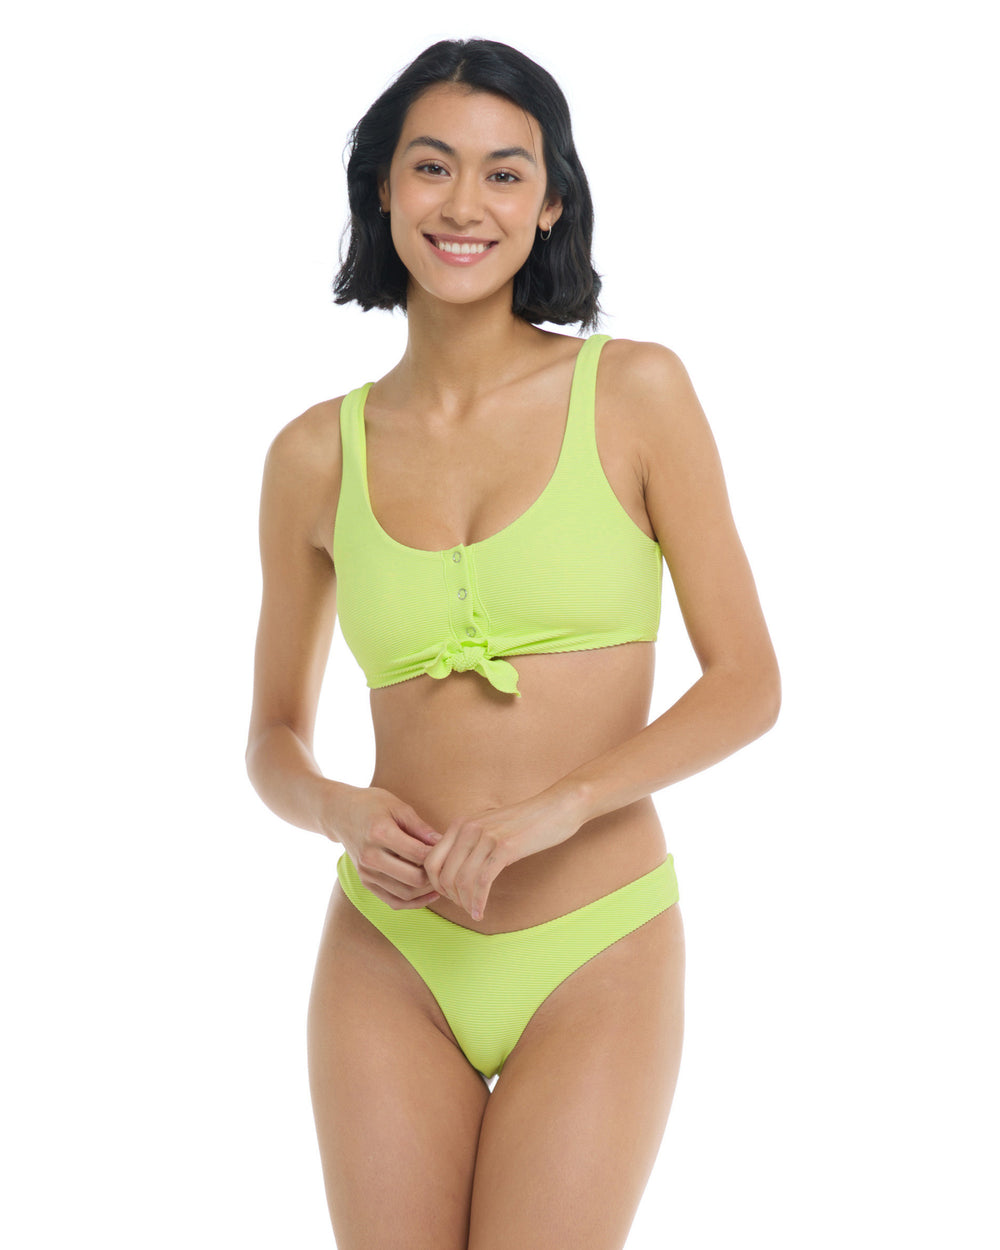 Vibrant Neon Bras for a Playful Look